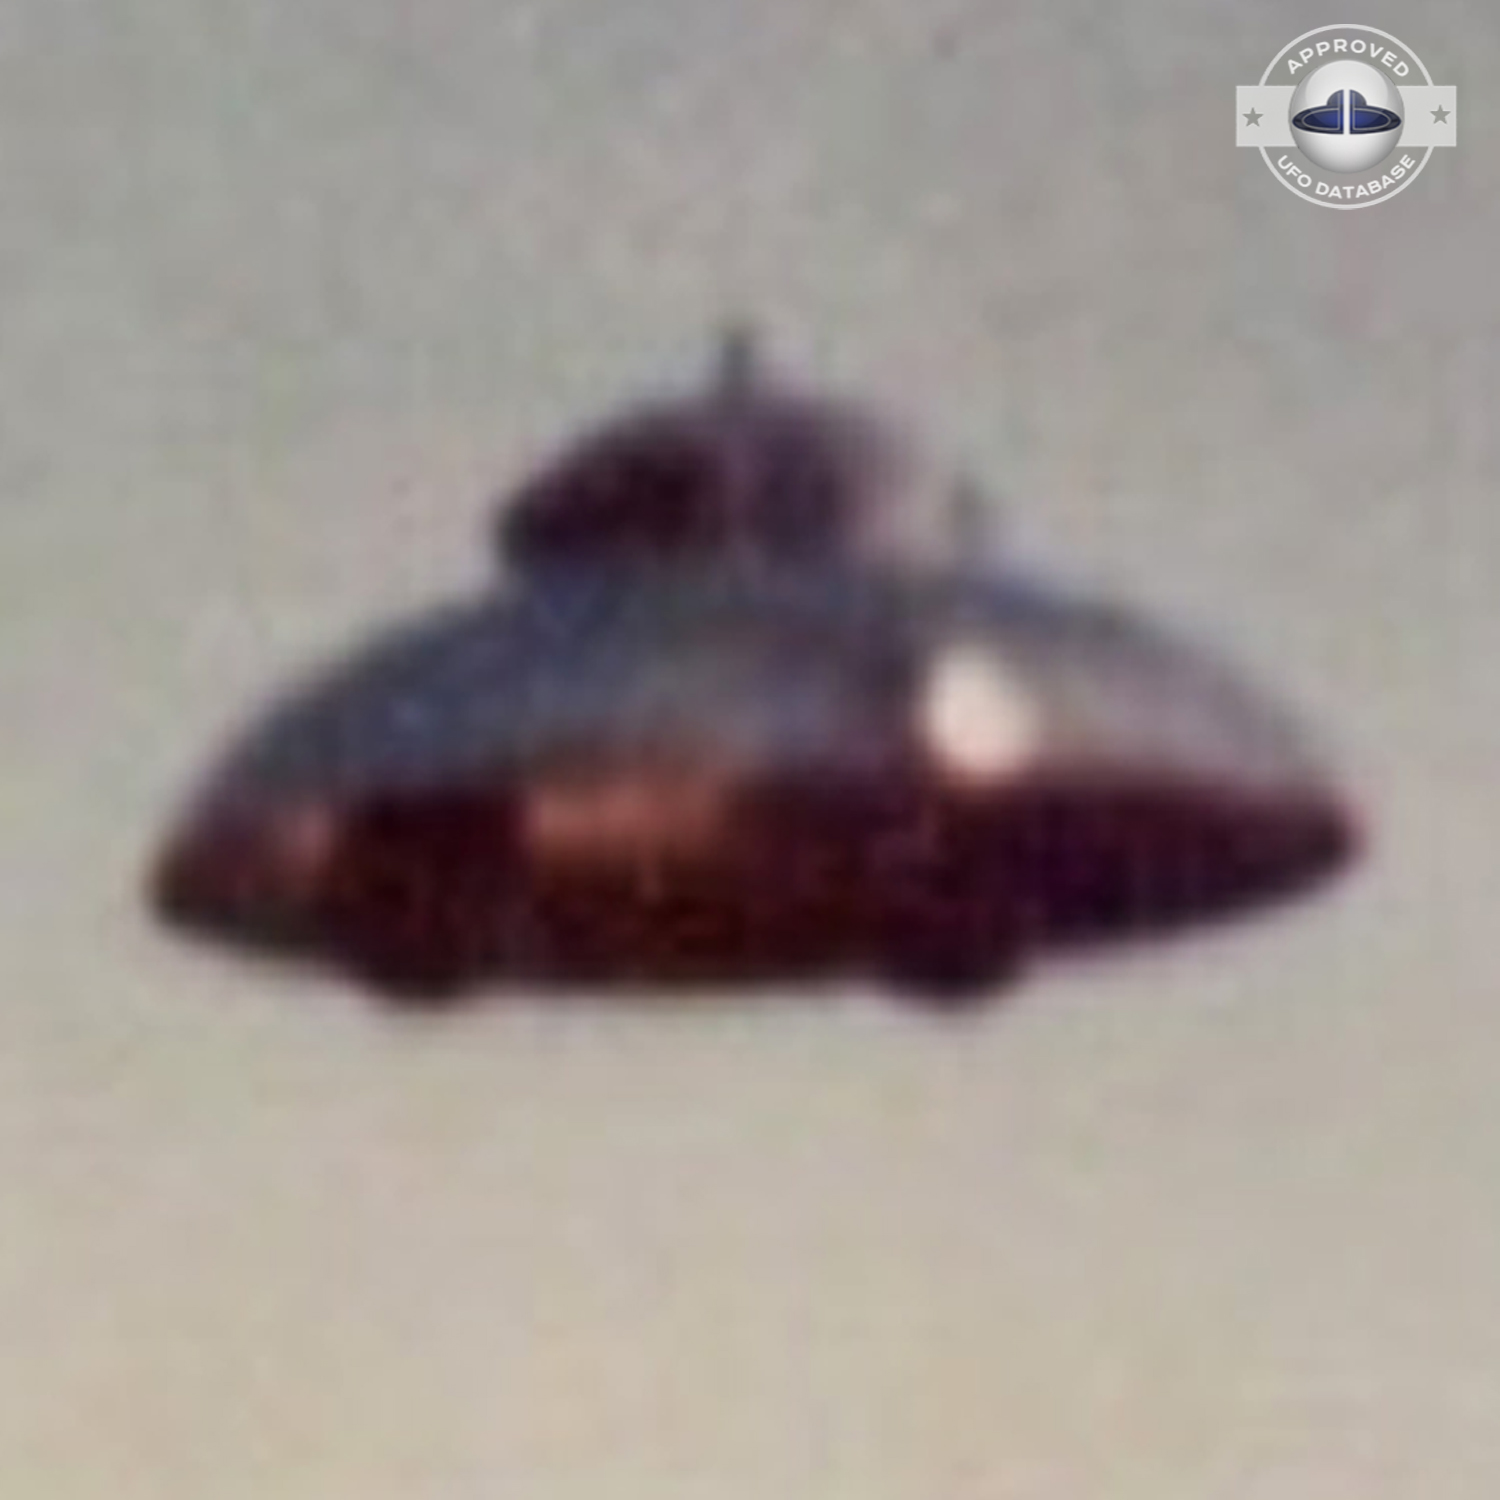 This UFO picture has been in several reports and controversies, 1970s UFO Picture #138-6